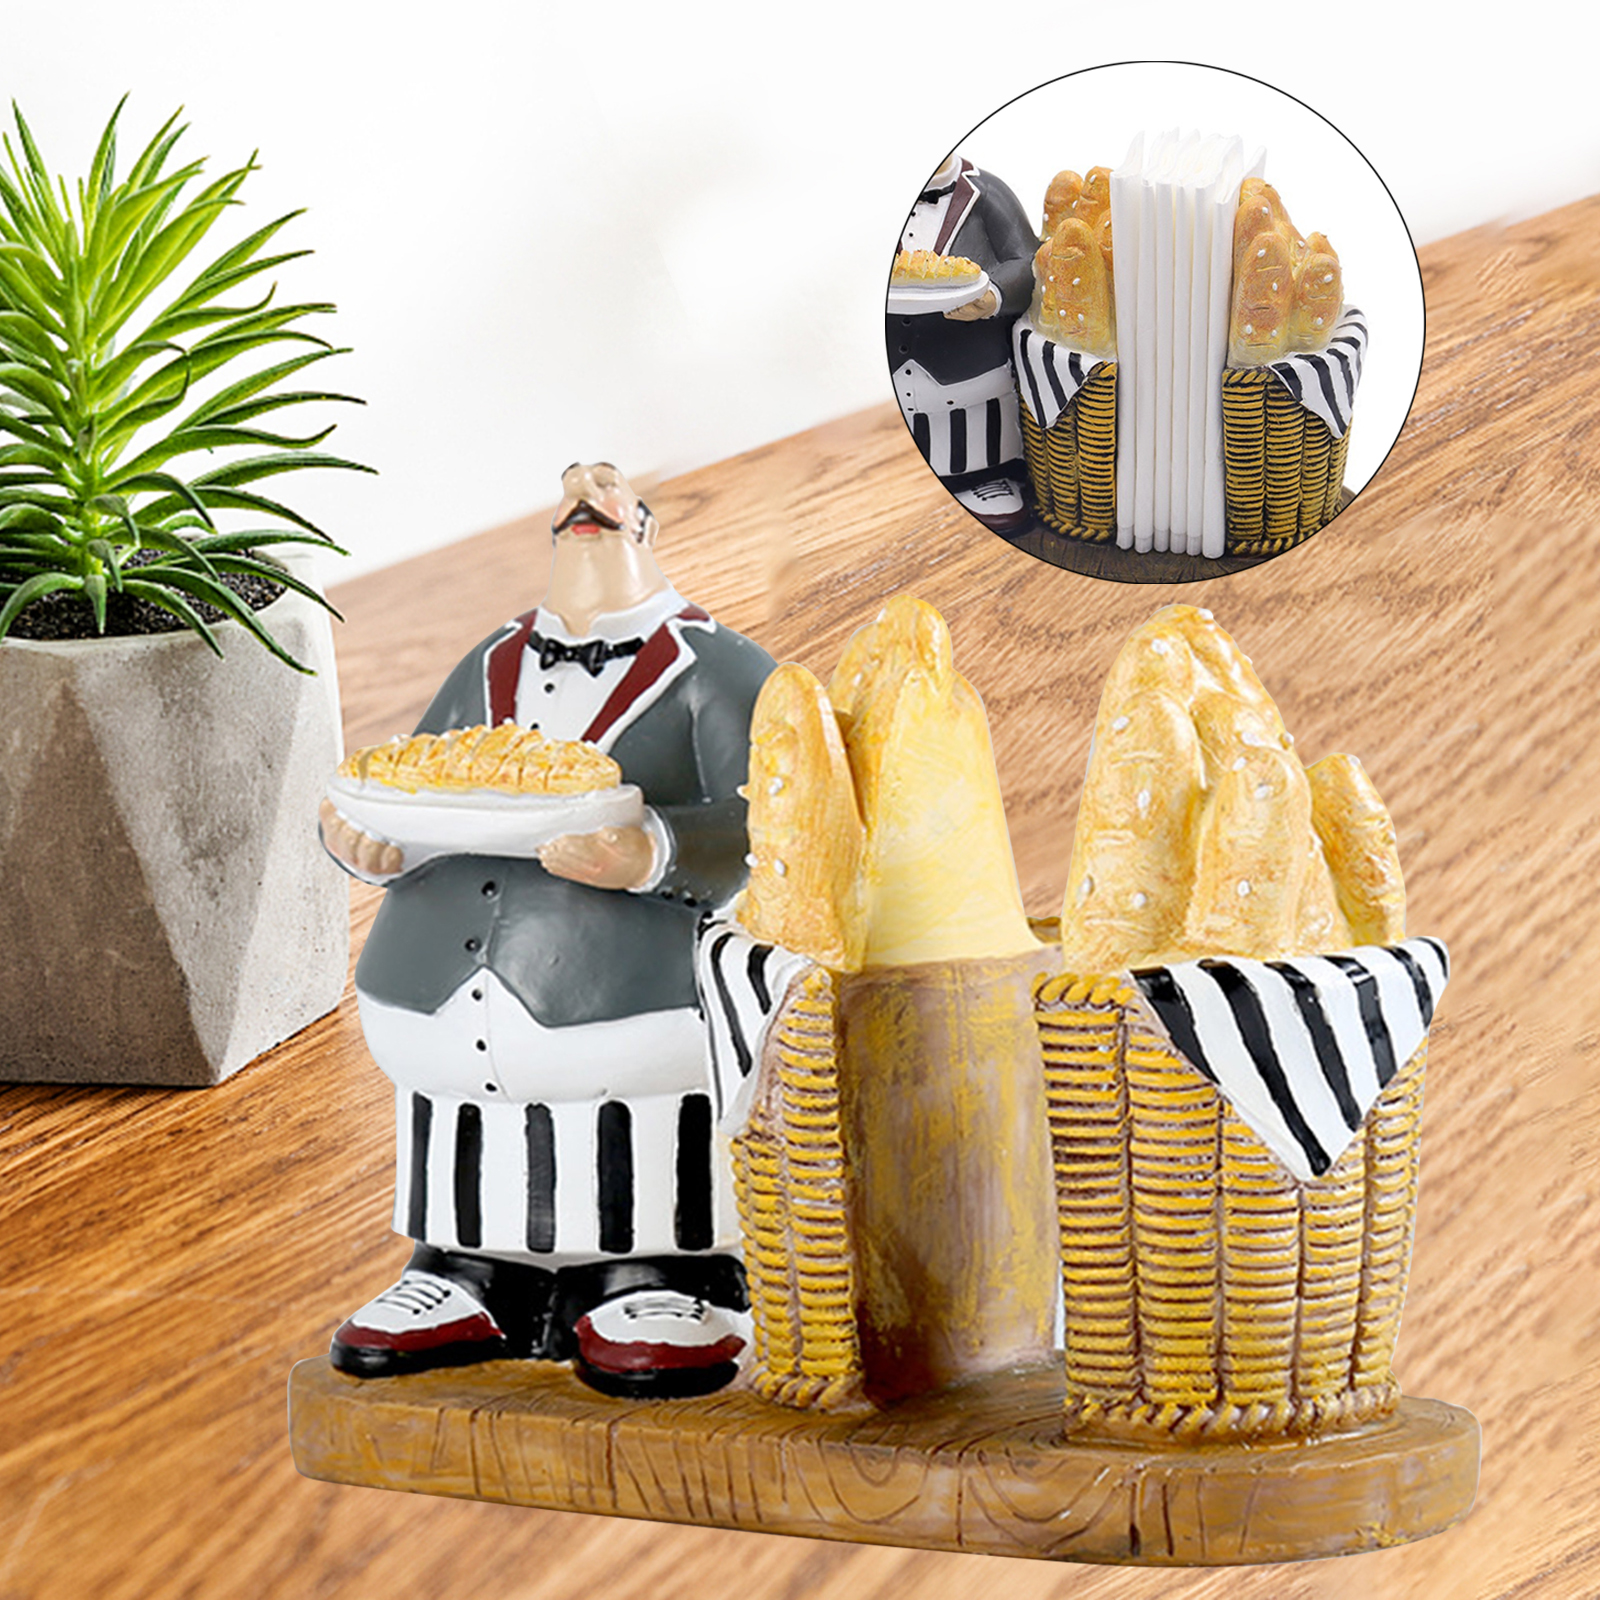 Creative Chef Figurine Paper Towel Holder Statue for Home Table Restaurant